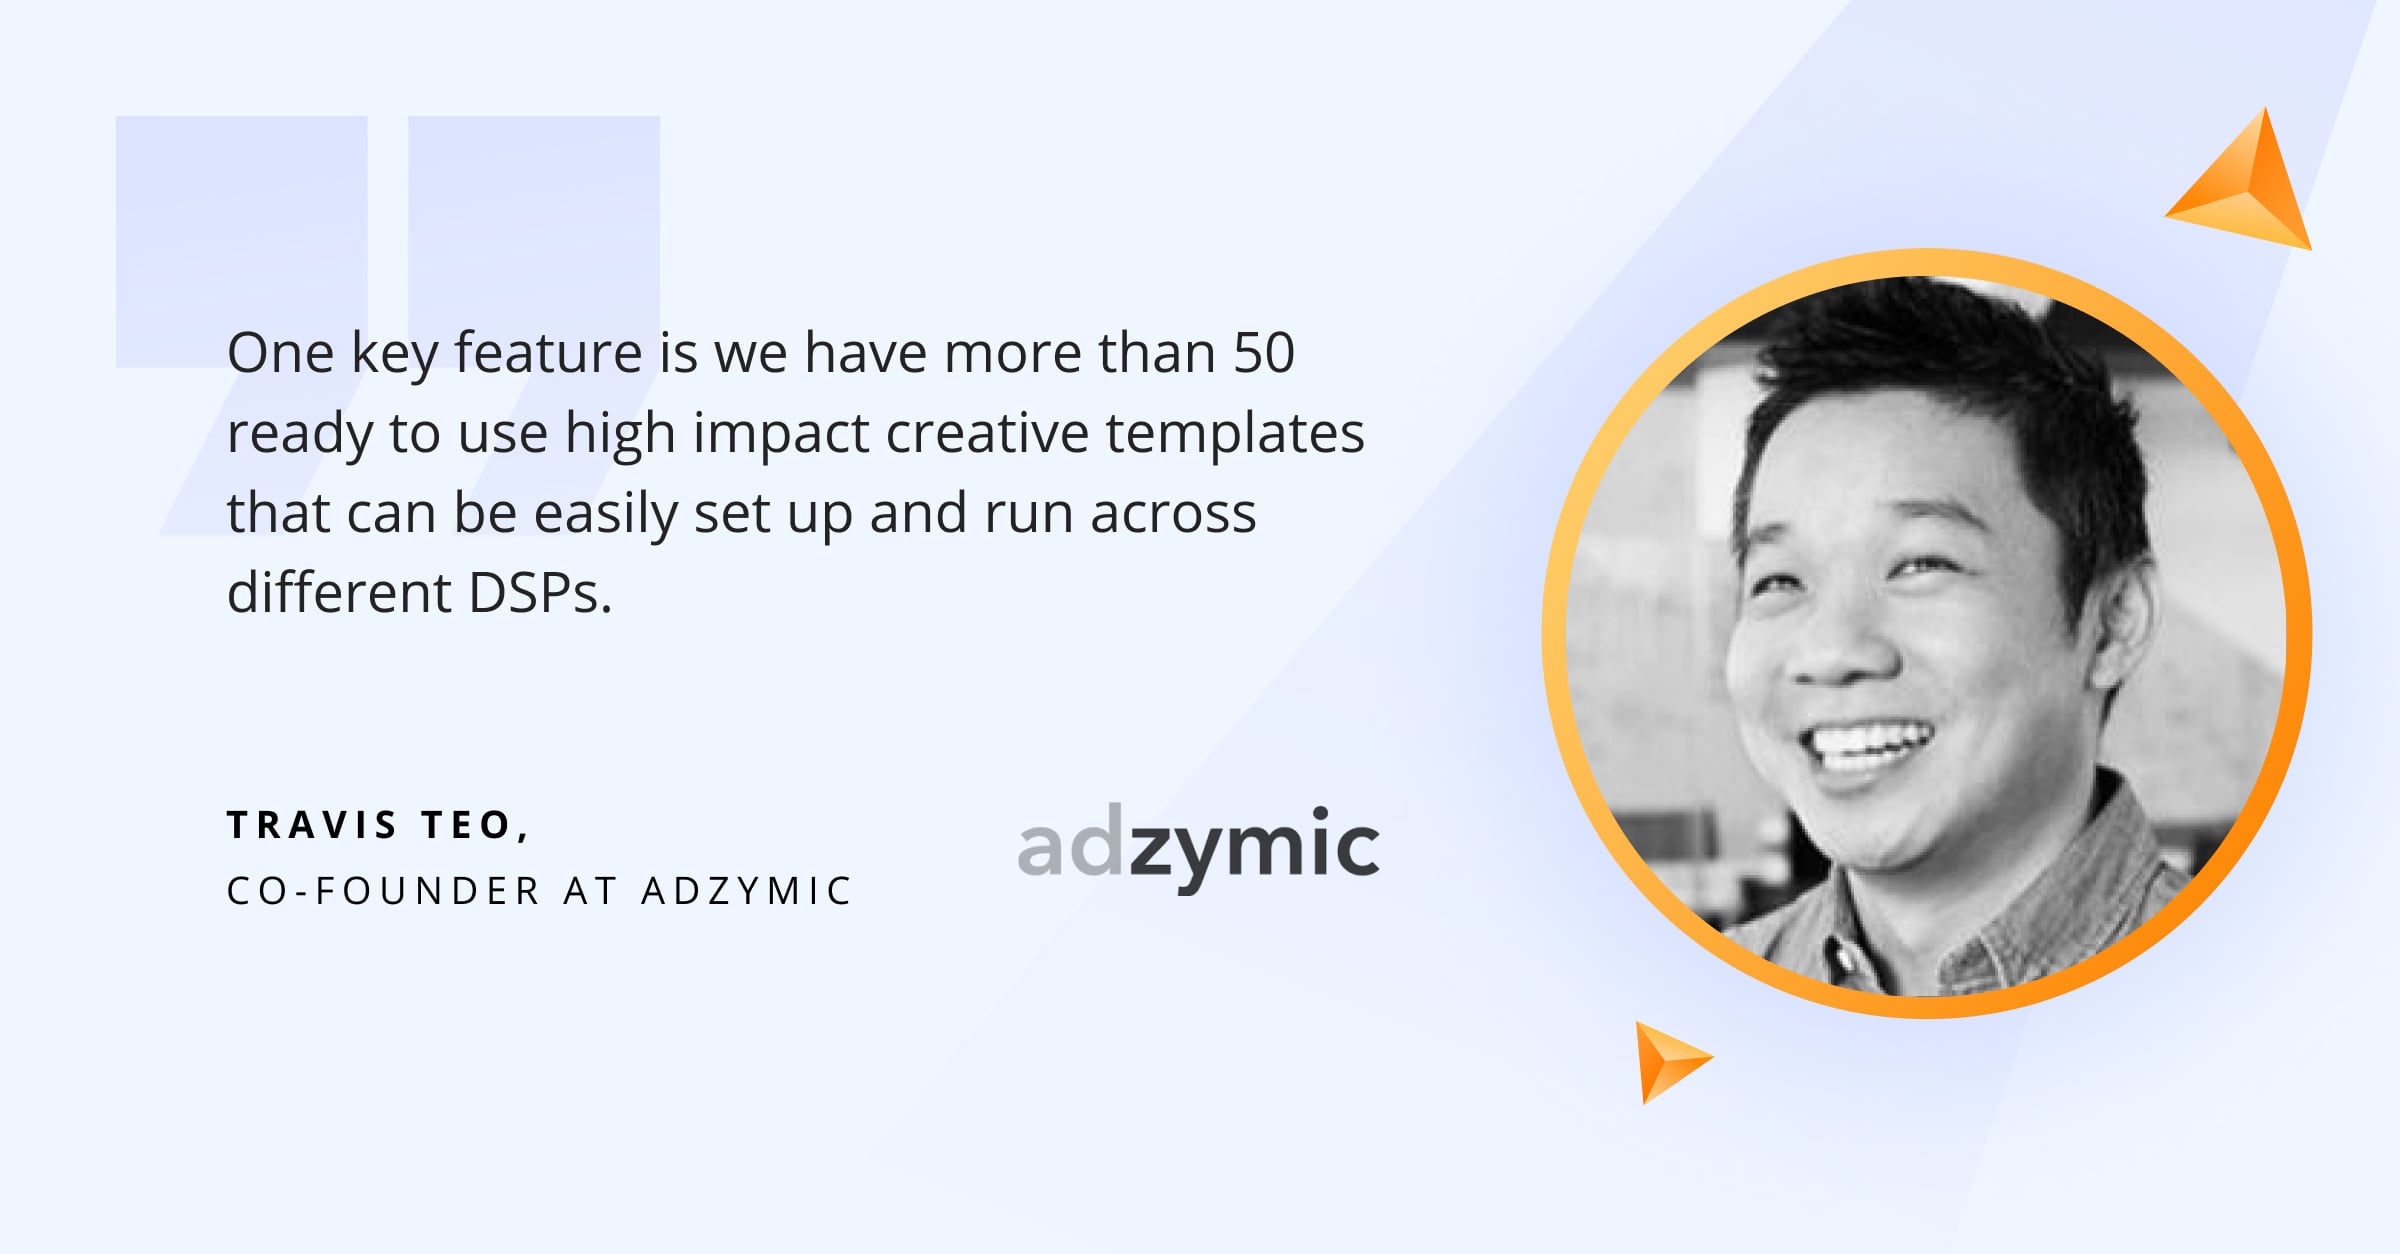 Insights from Travis Teo, Co-Founder at Adzymic